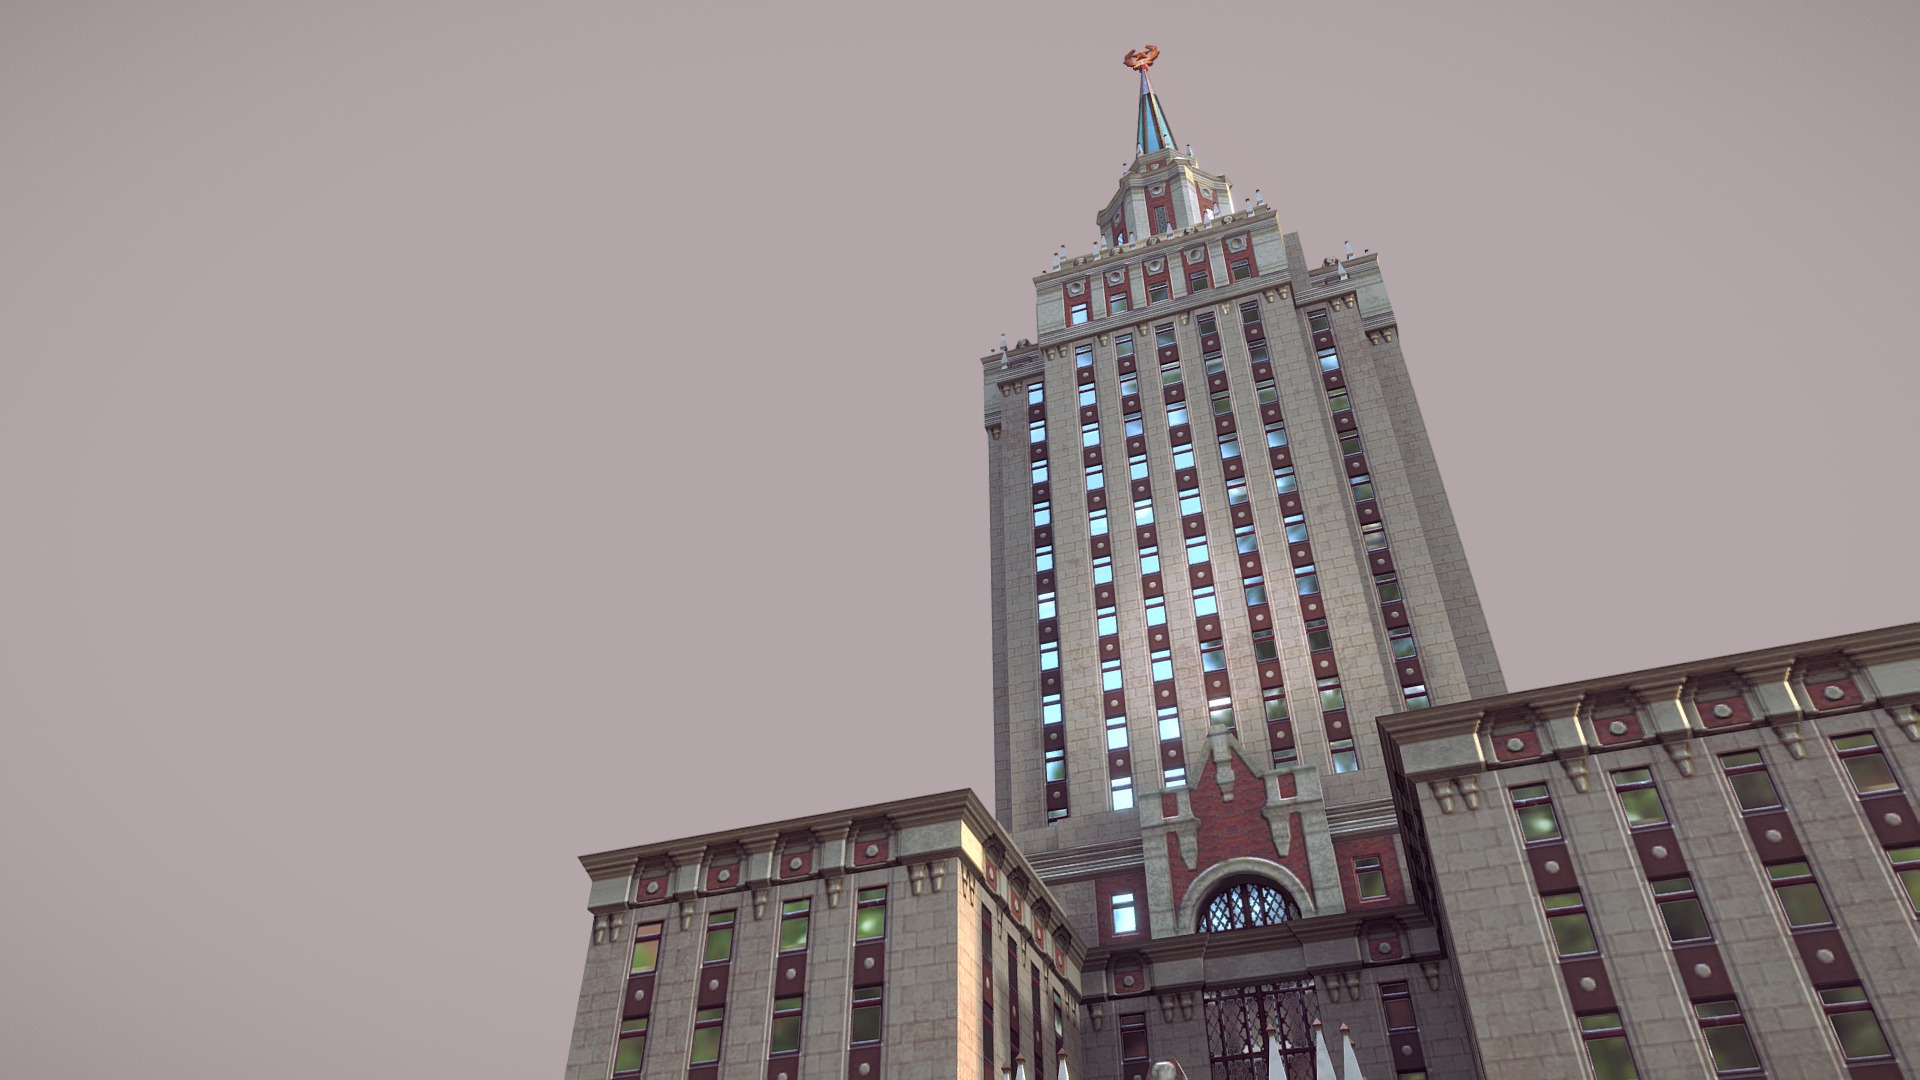 3D model Hotel Hilton Leningradskaya - This is a 3D model of the Hotel Hilton Leningradskaya. The 3D model is about a tall building with a flag on top.